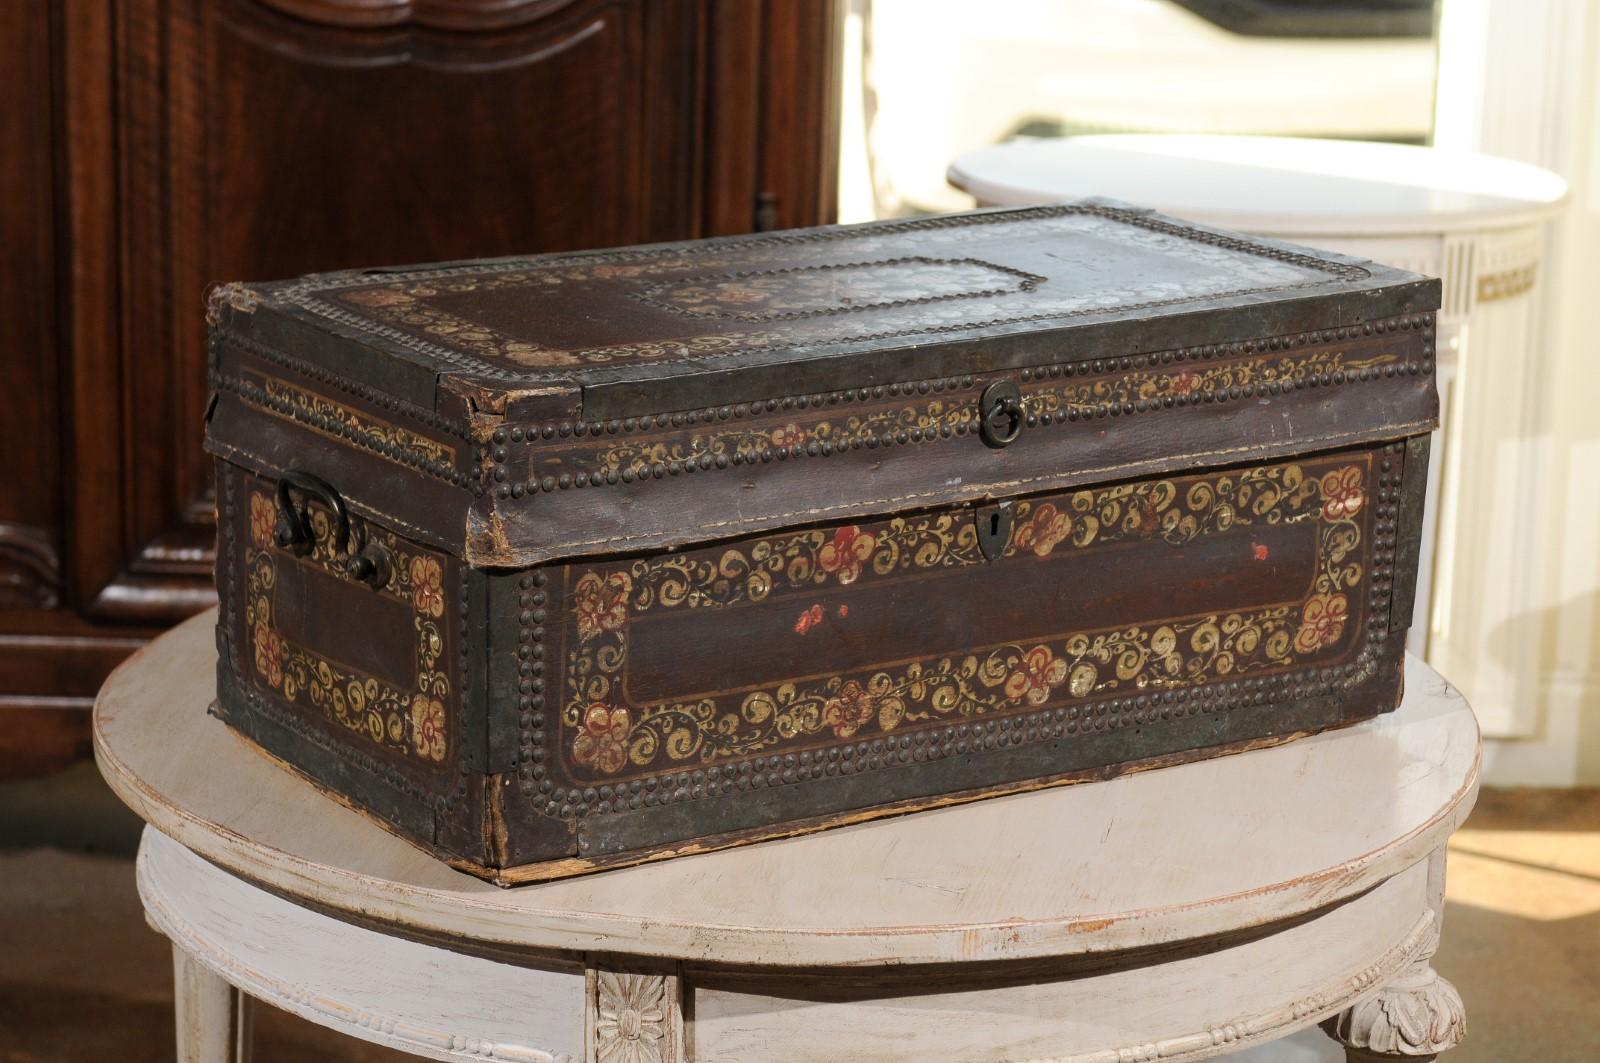 An English painted Regency period camphor wood trunk from the early 19th century, with hand painted floral decor. Born in England during the Regency period, this exquisite camphor wood and leather trunk features a lovely painted décor of petite